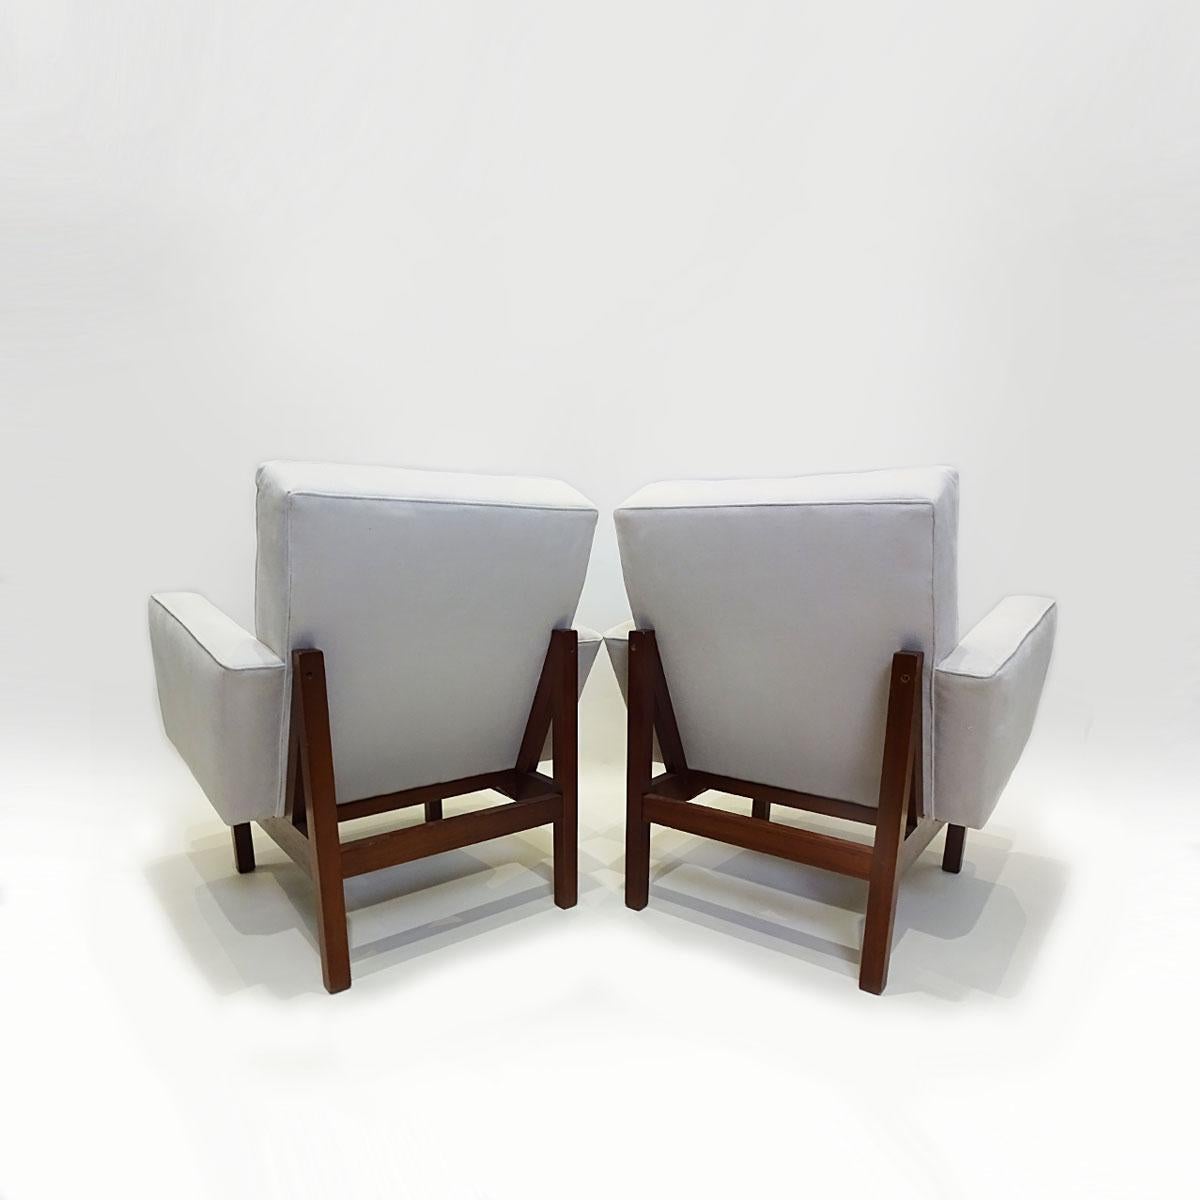 American Pair of 1940s Easy Chairs Attributed to Florence Knoll